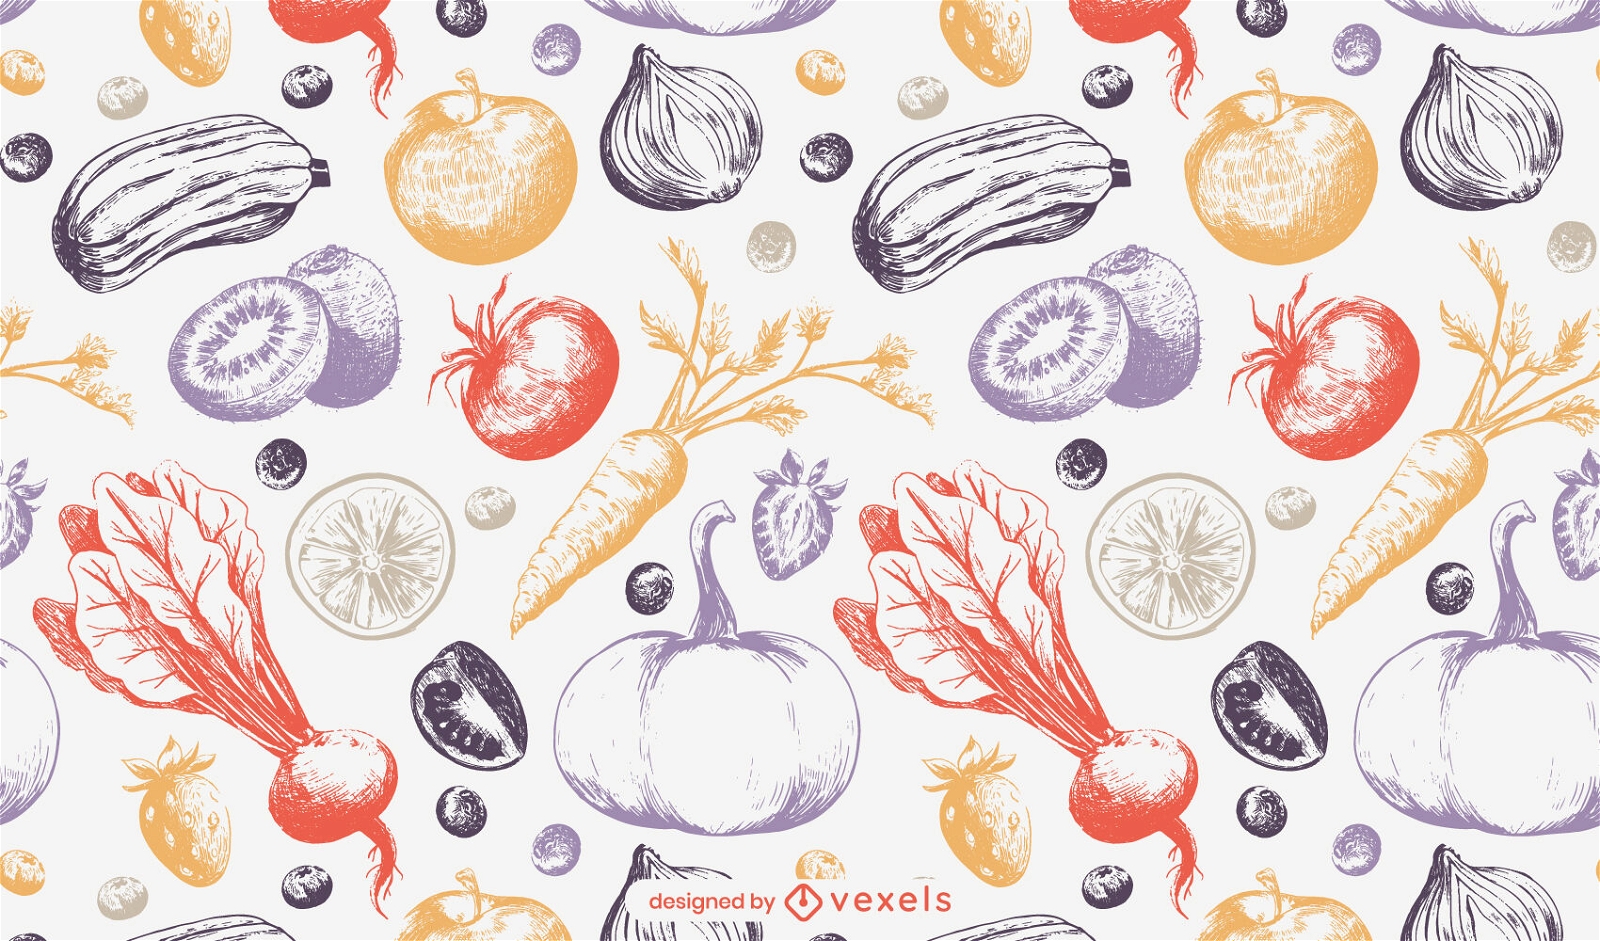 Fruits and vegetables hand drawn pattern